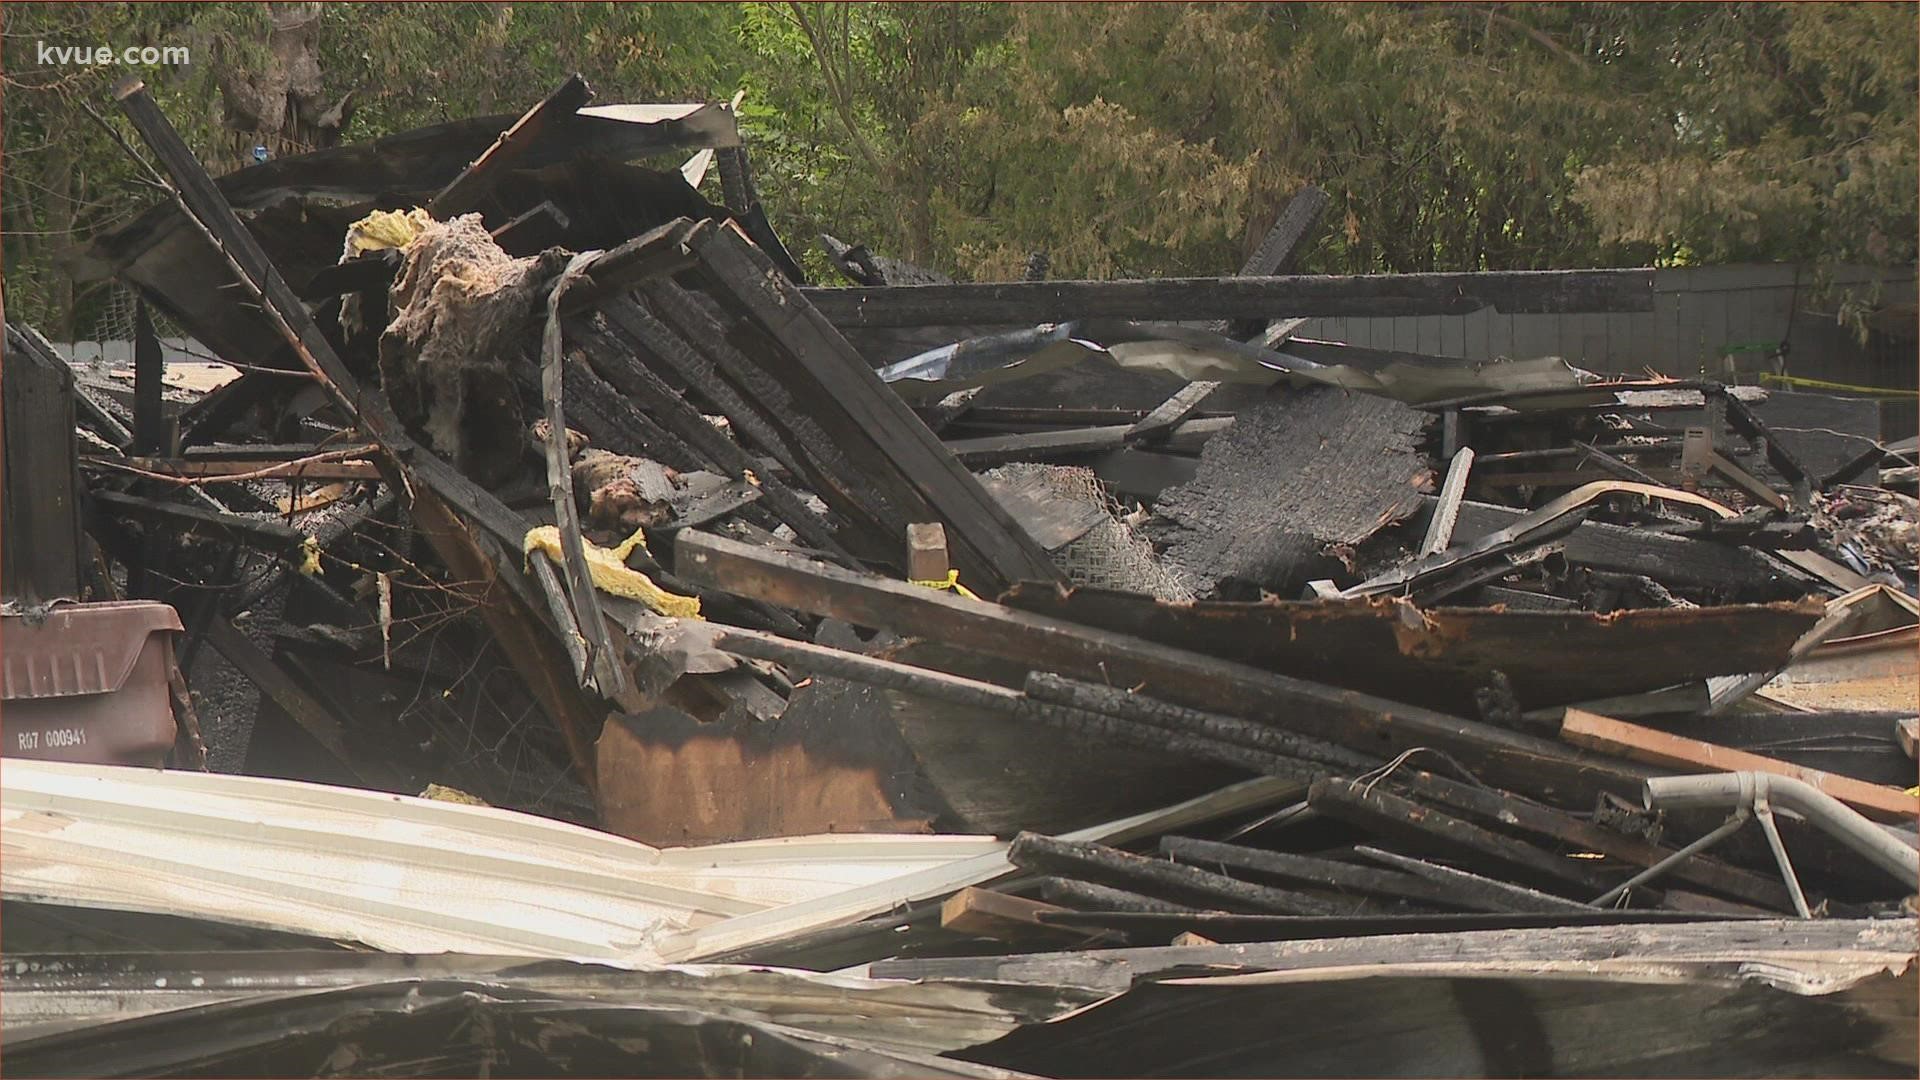 Investigators are trying to figure out what caused a deadly fire in Lockhart.